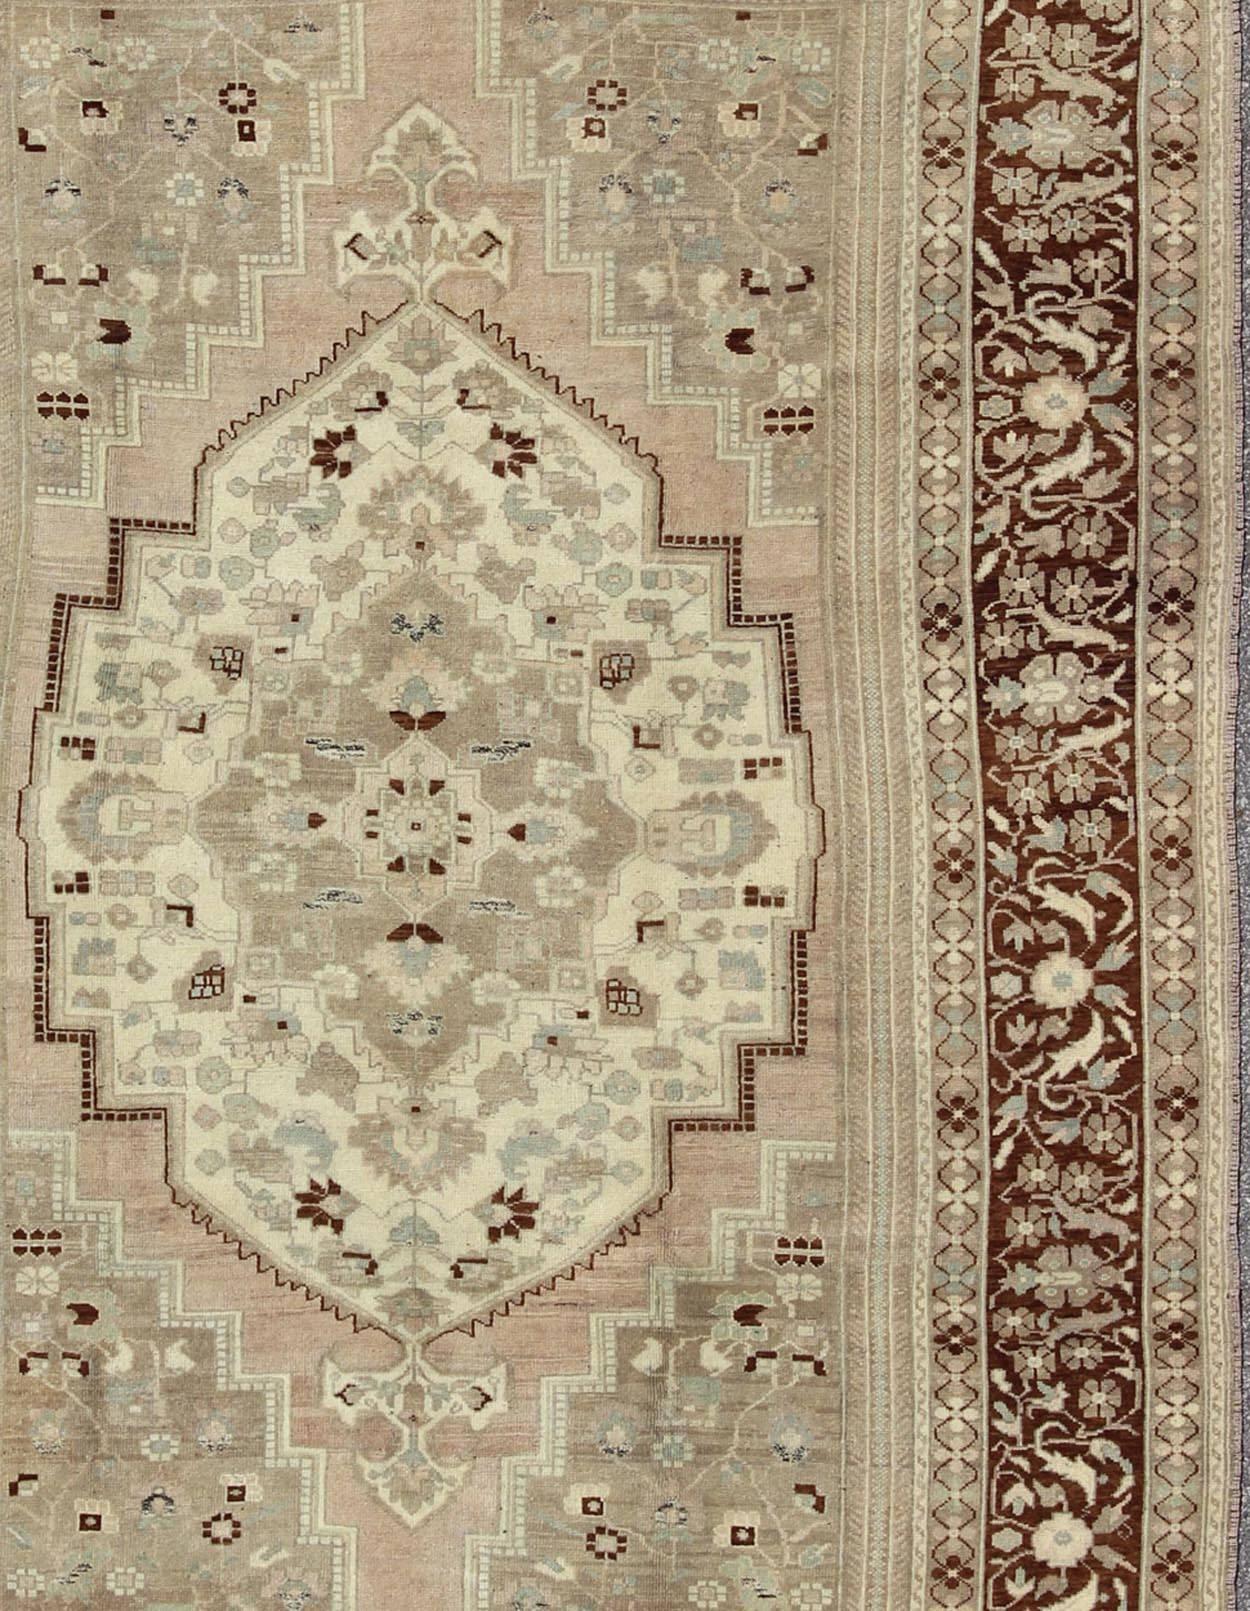 Charming Vintage Oushak Rug in Brown Border, Taupe, Blush and Gray/Green In Excellent Condition For Sale In Atlanta, GA